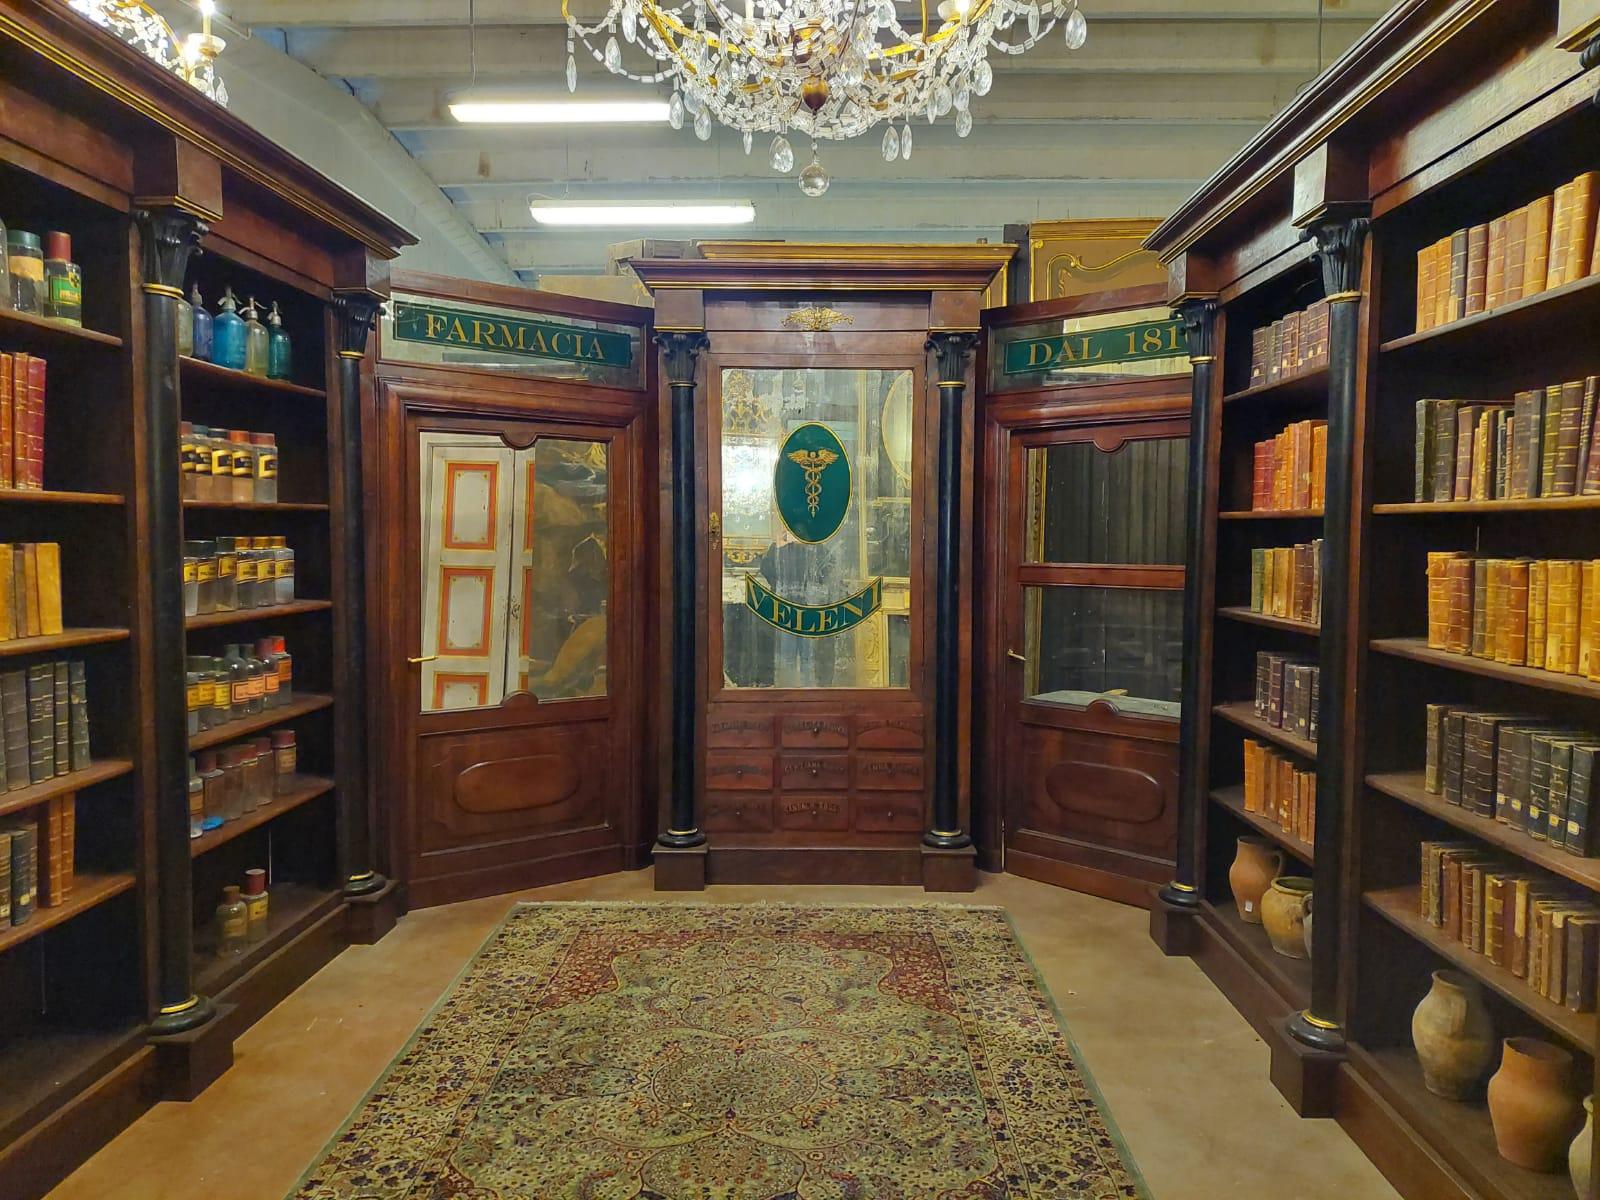 Complete antique pharmacy cabinet, with 3 open bookcases on the sides, 1 bookcase with drawers and 2 original doors with glass and enameled mirror sign. Built in the mid-19th century for a pharmacy shop in Italy (Turin), already conservatively